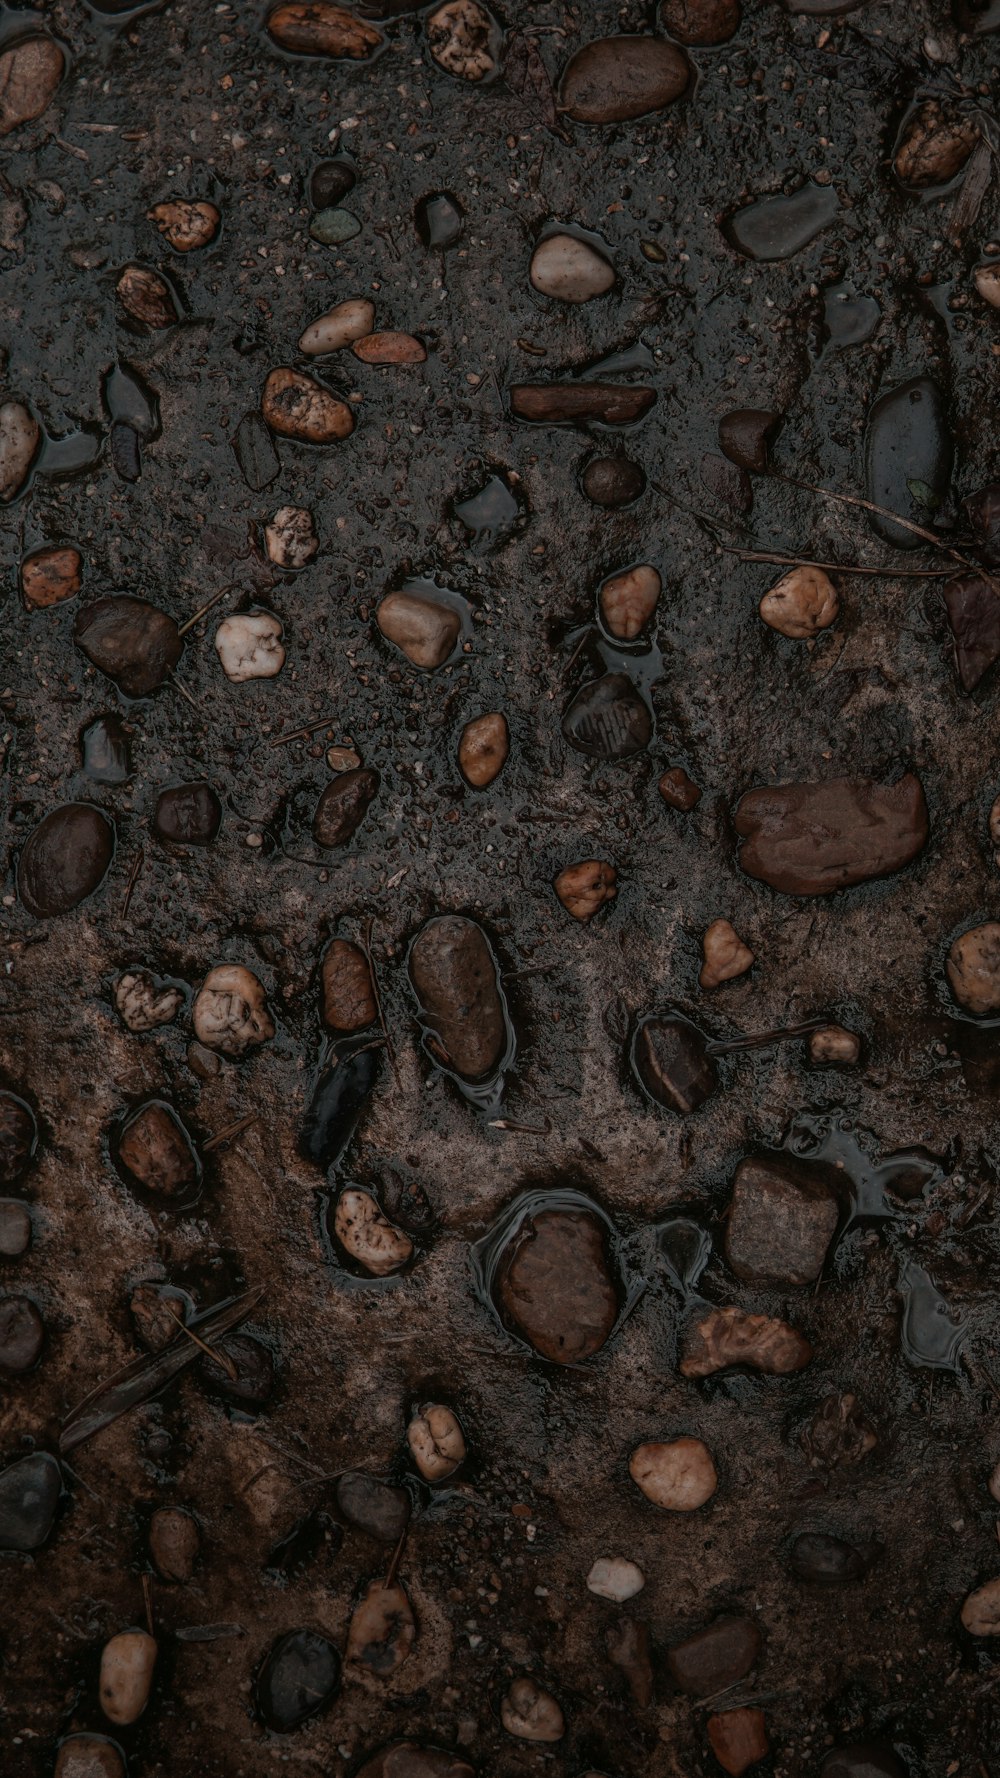 brown and black stones on ground